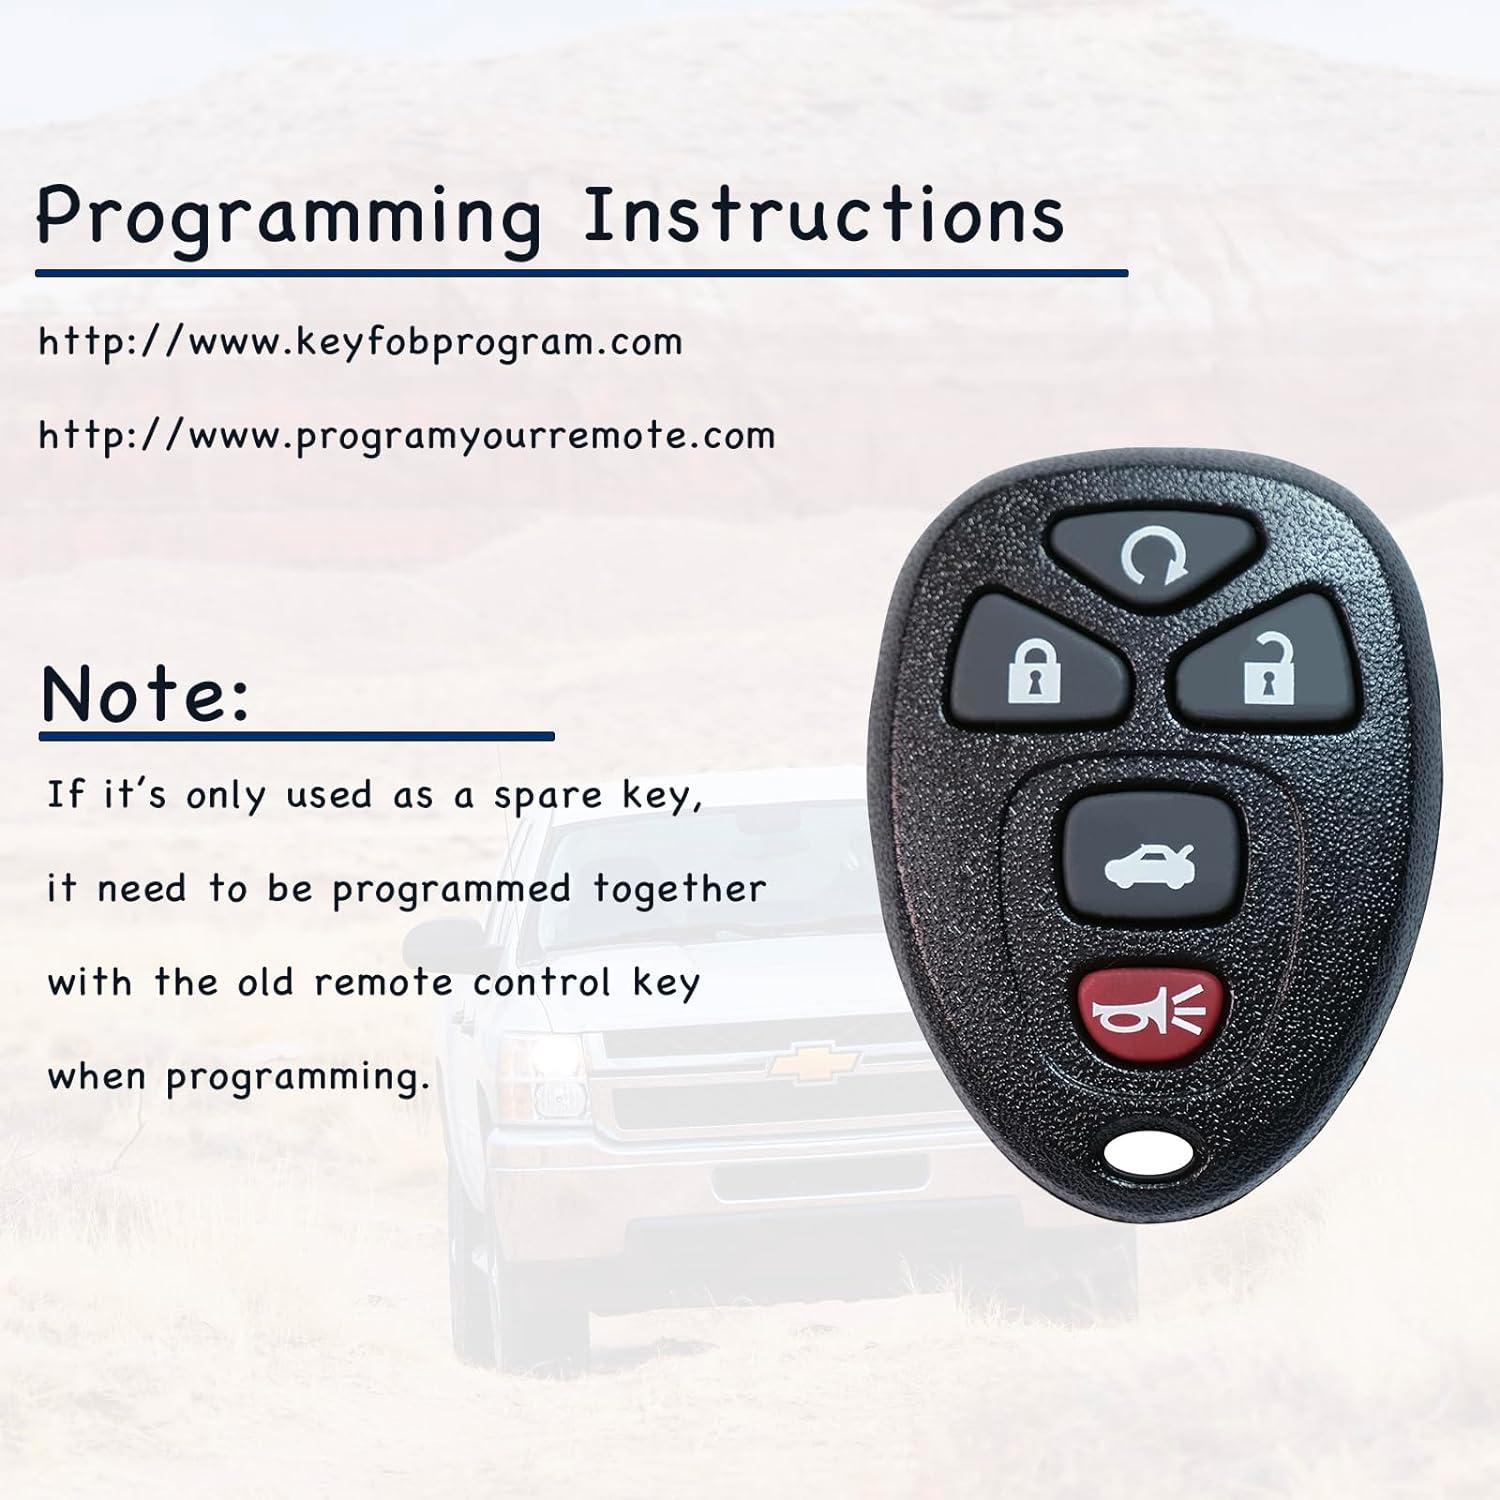 Key Fob Keyless Entry Remote Control Key Fob Replacement Fits for